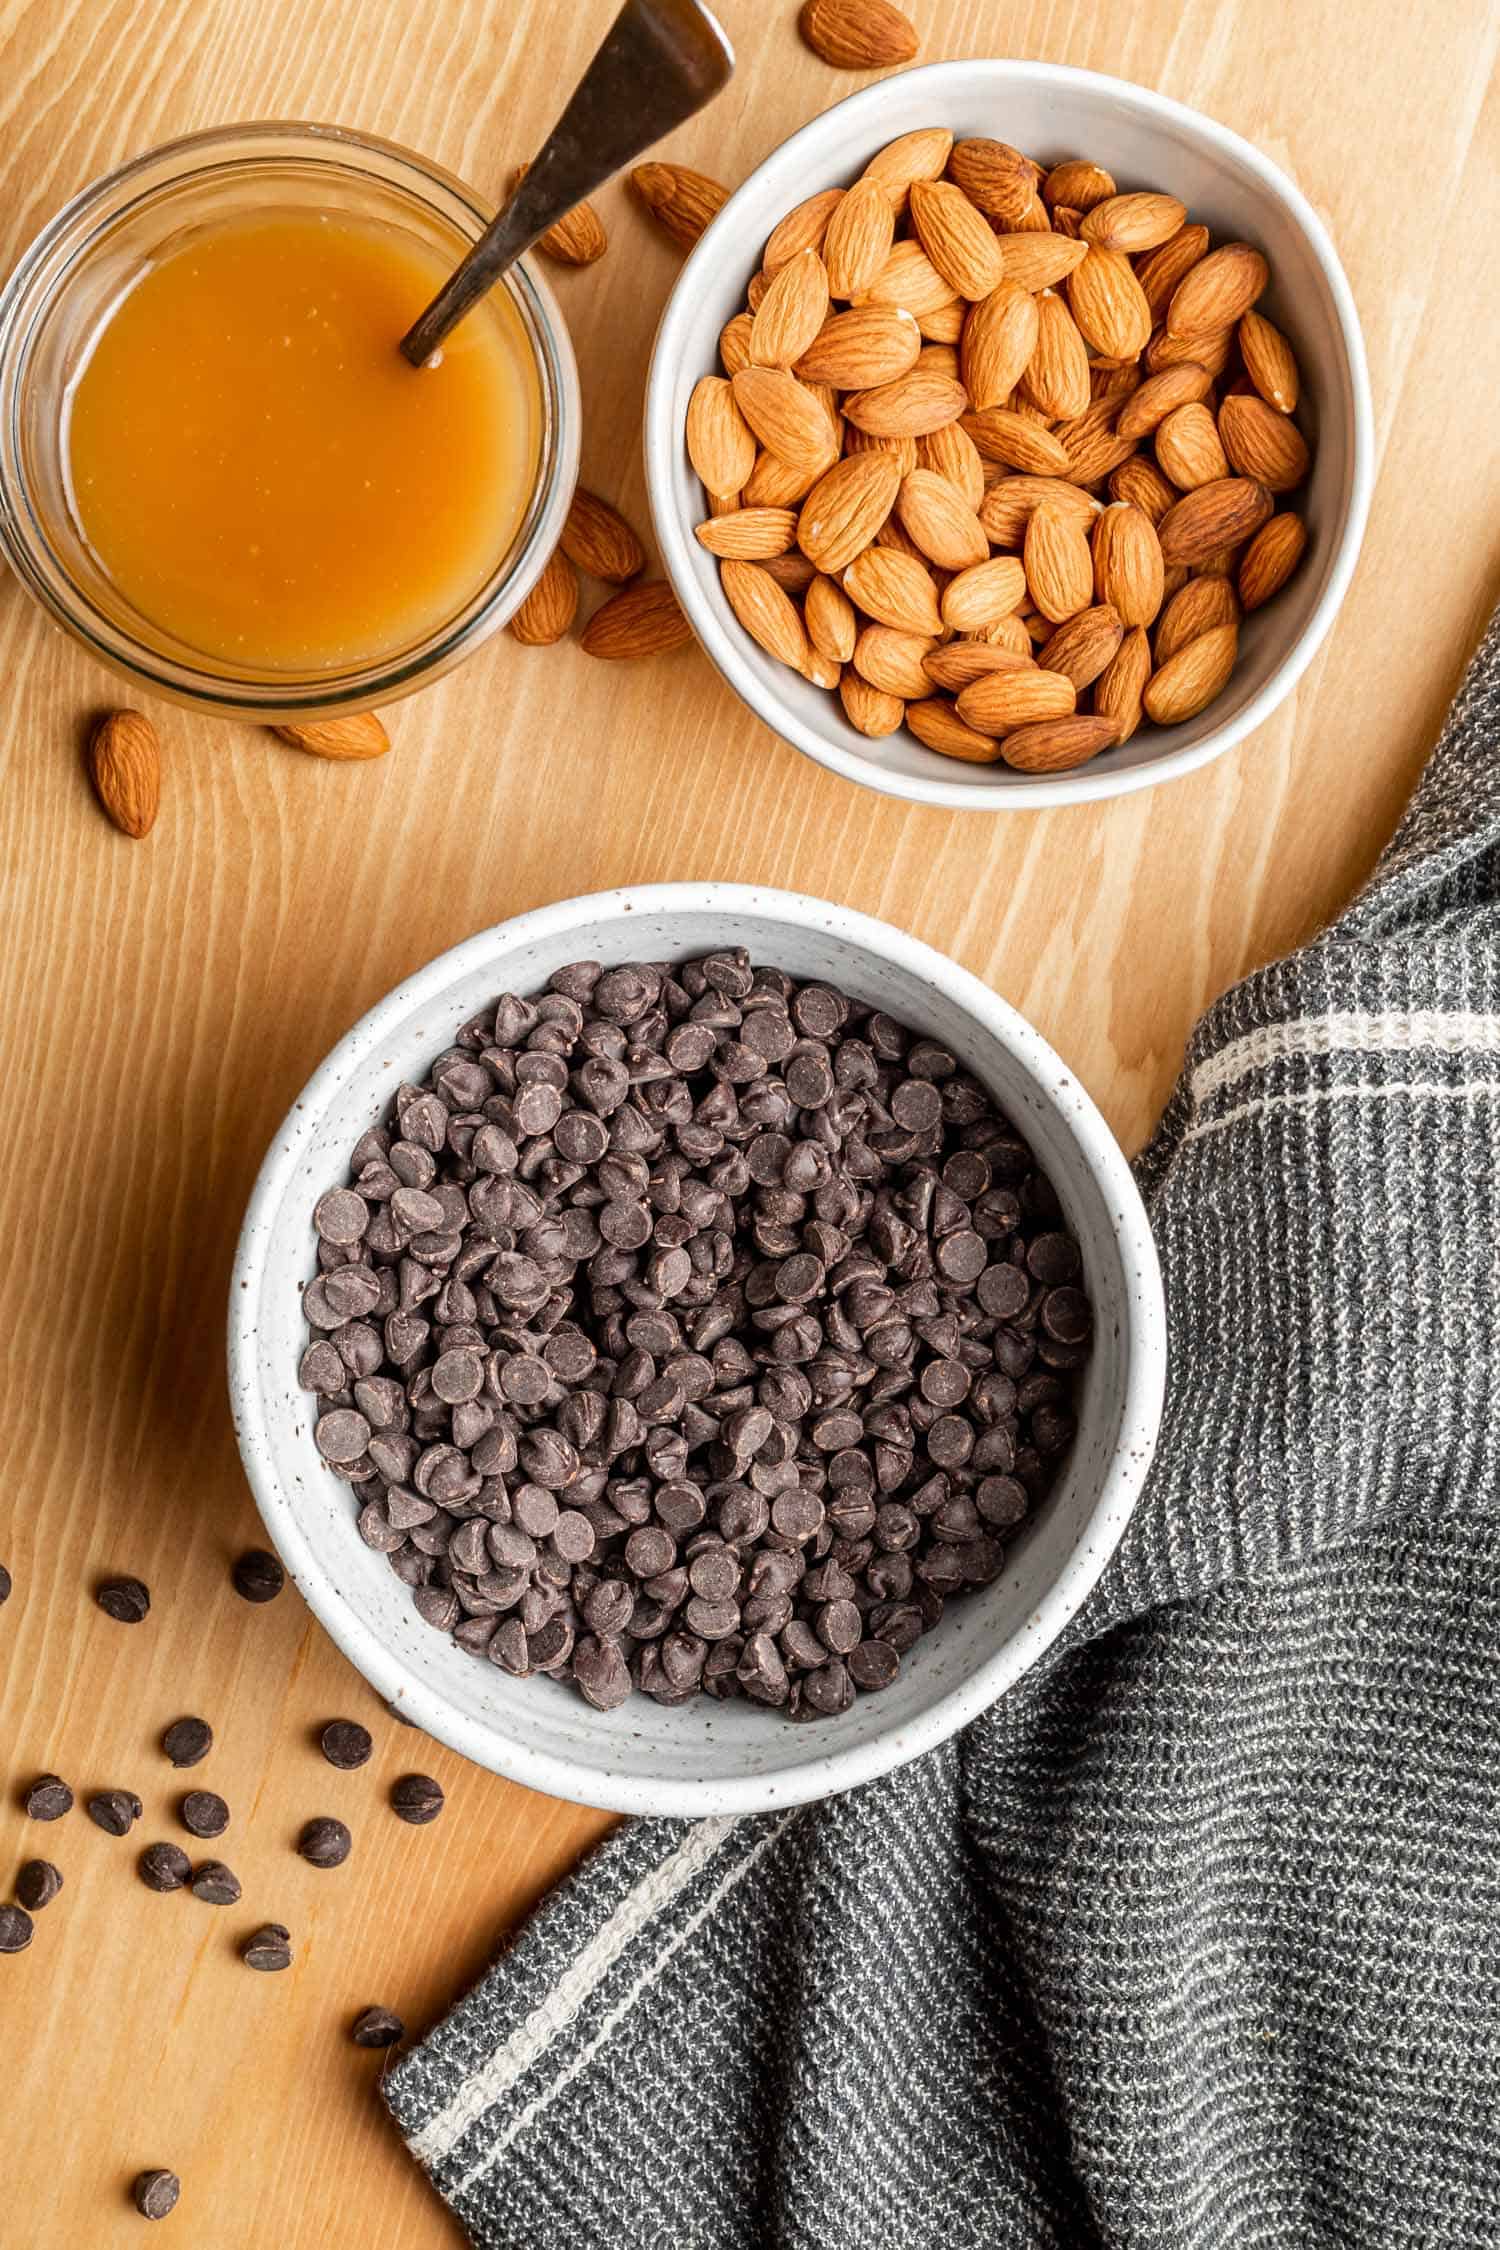 a bowl of chocolate chips, a bowl of almonds, and a jar of caramel on a wooden backdrop